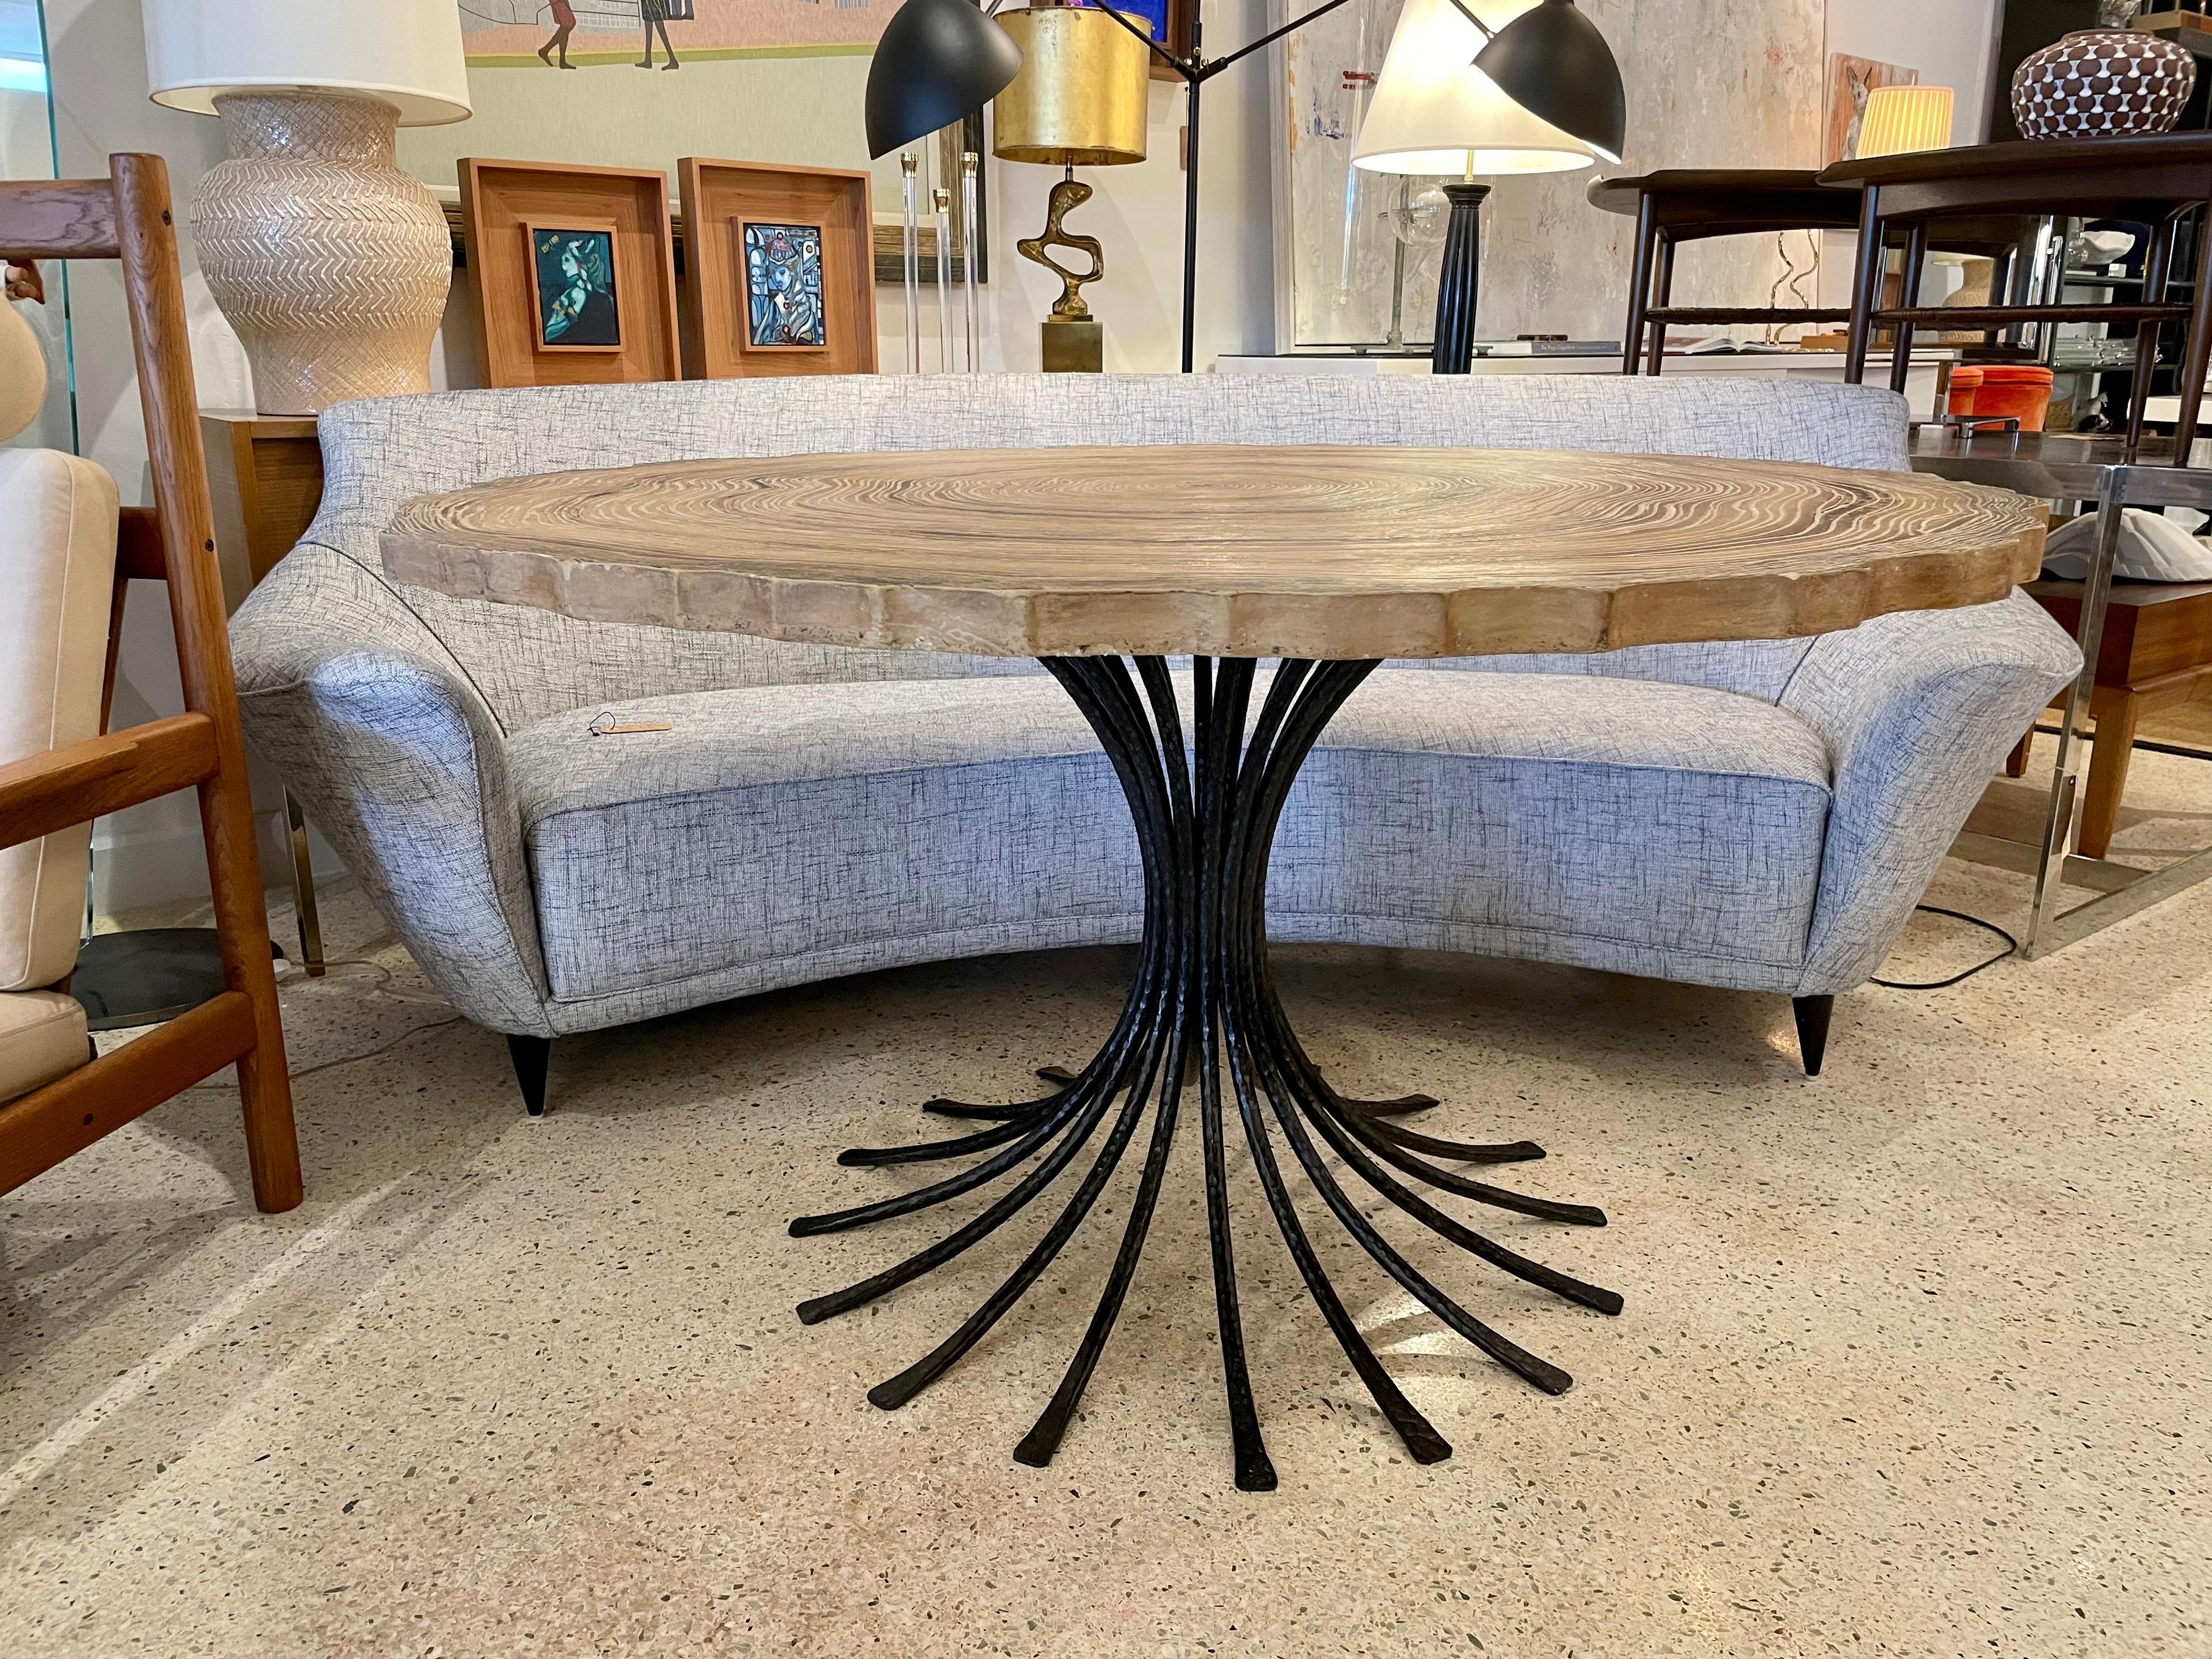 An amazingly fun and whimsical table with hammered iron base and a 1 1/2 inch thick top like no other. Painted top as a slice of a mighty redwood, the age rings and variations of wood tones are carved in to the stone to depict a realistic feel of a